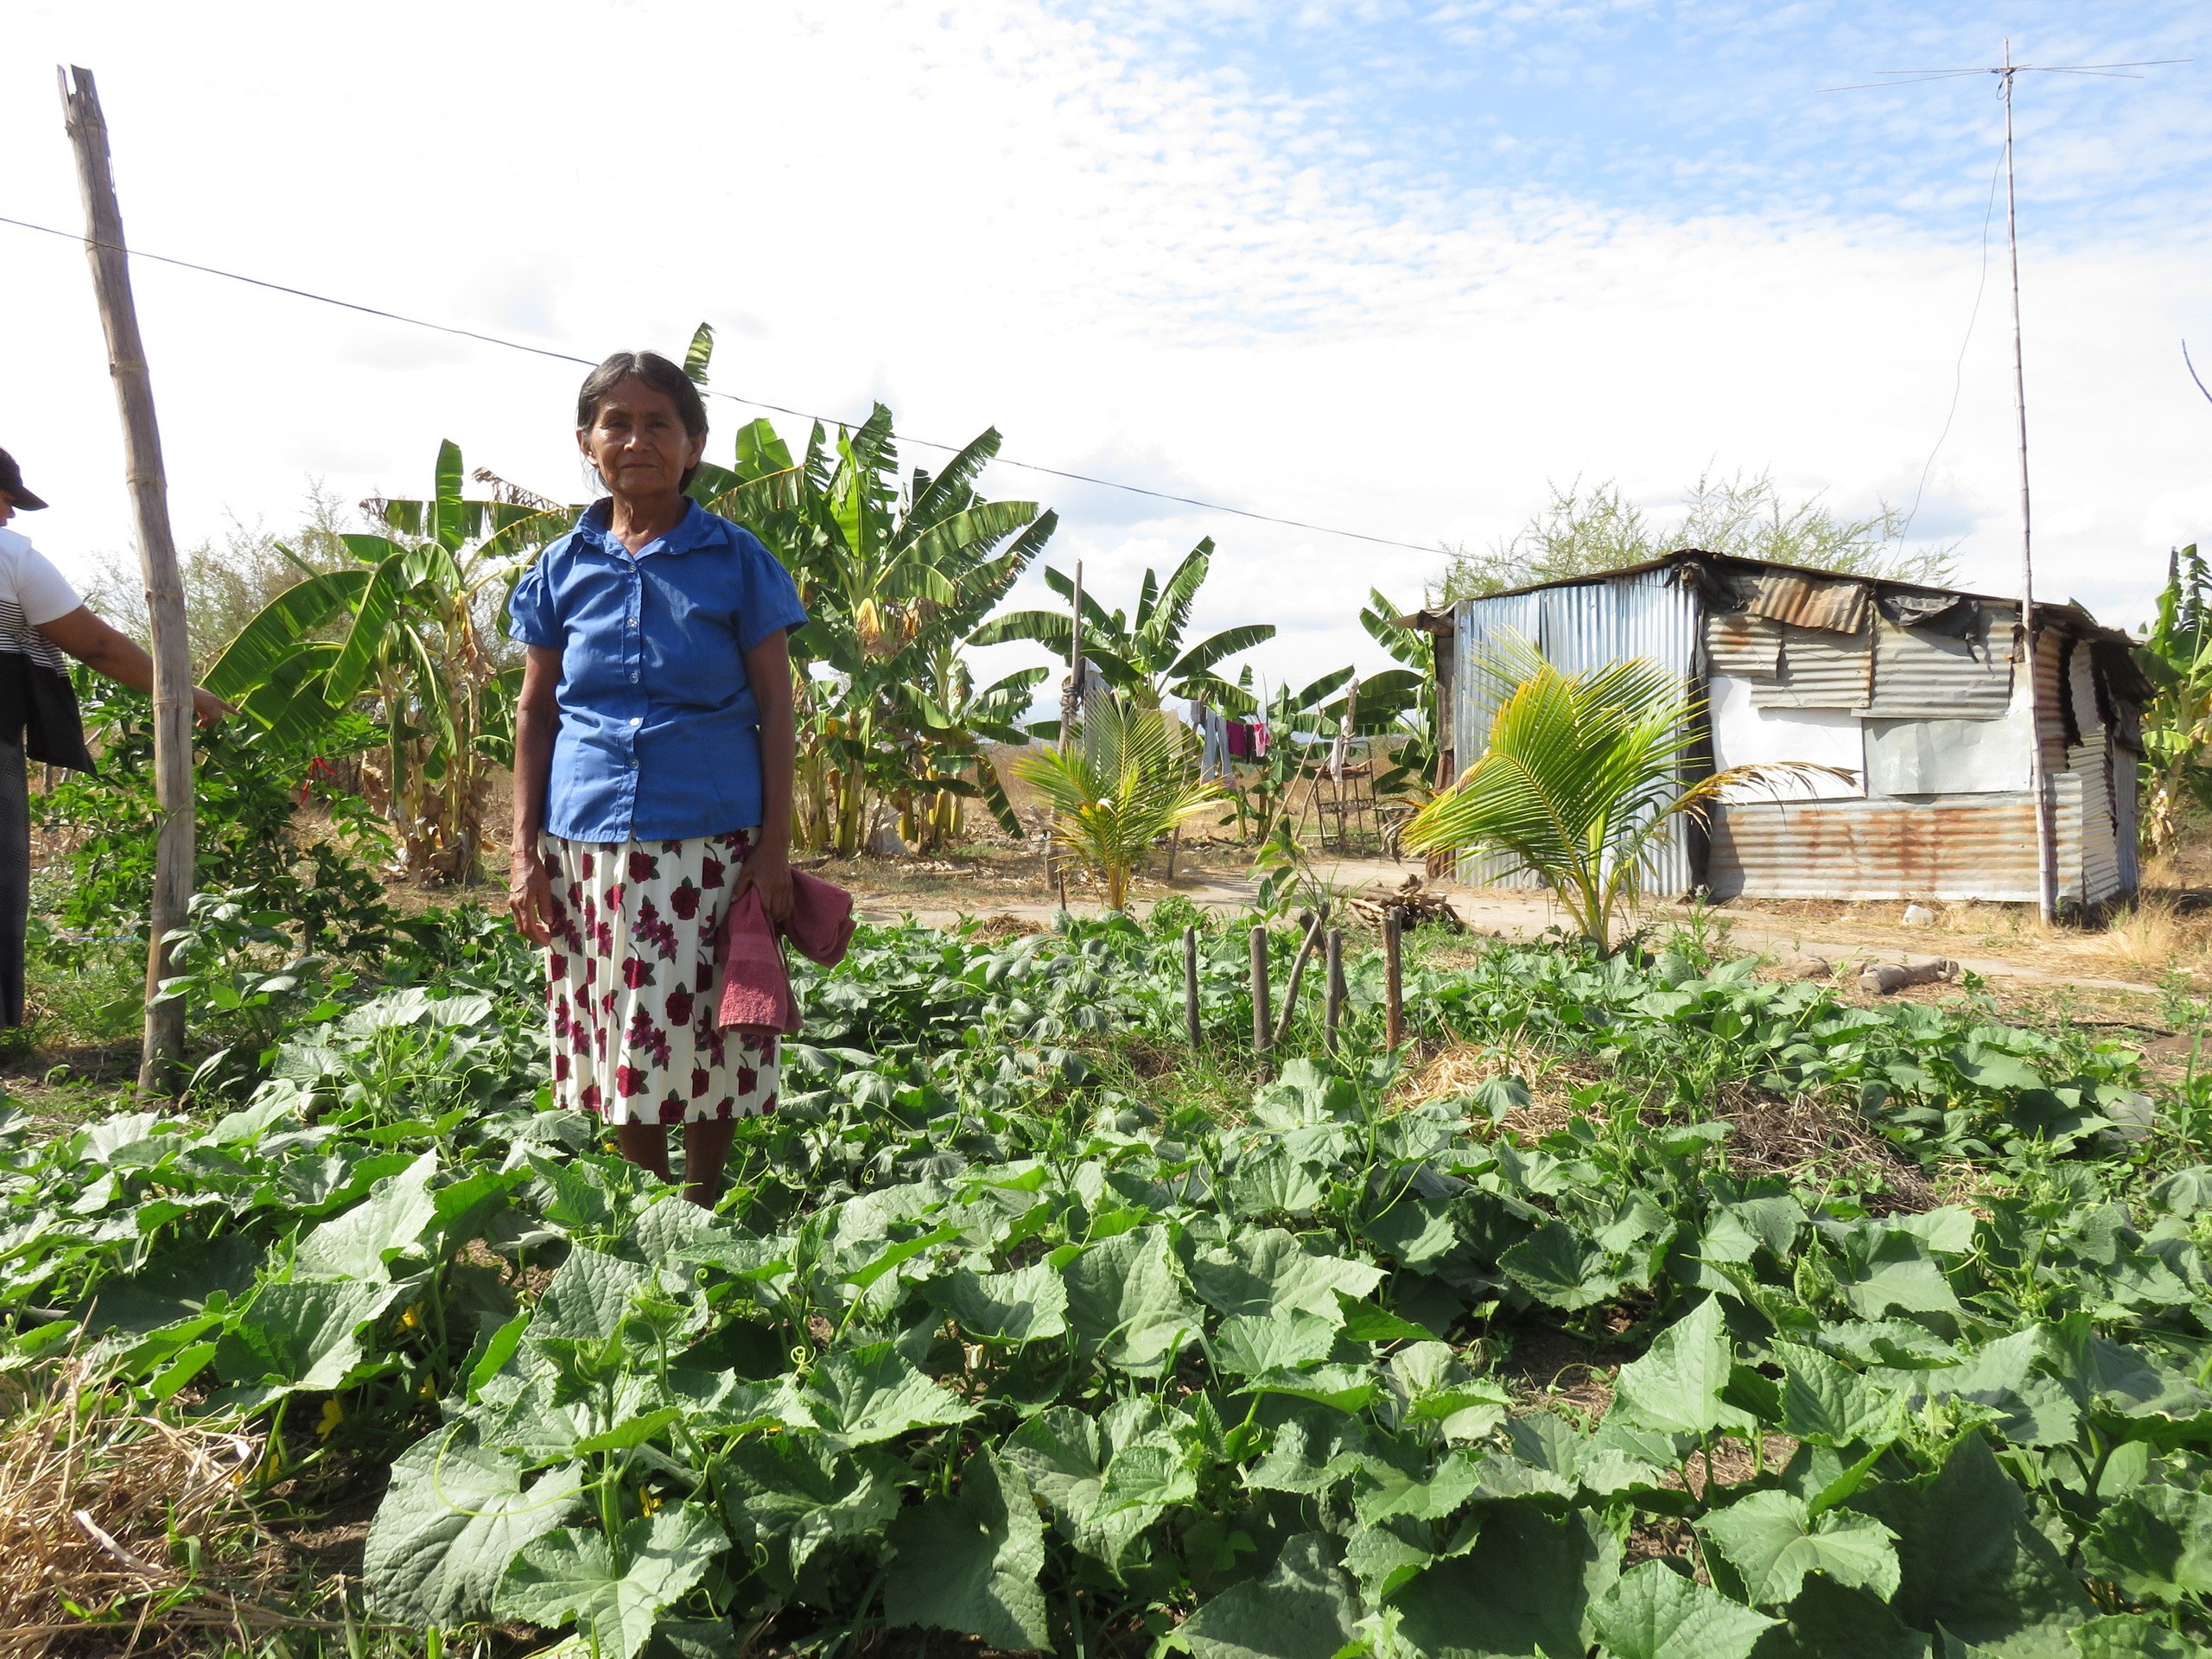 Maria Antonia, an older ESPERA woman living in El Salvador, stands in a field of cabbage in front of her home.